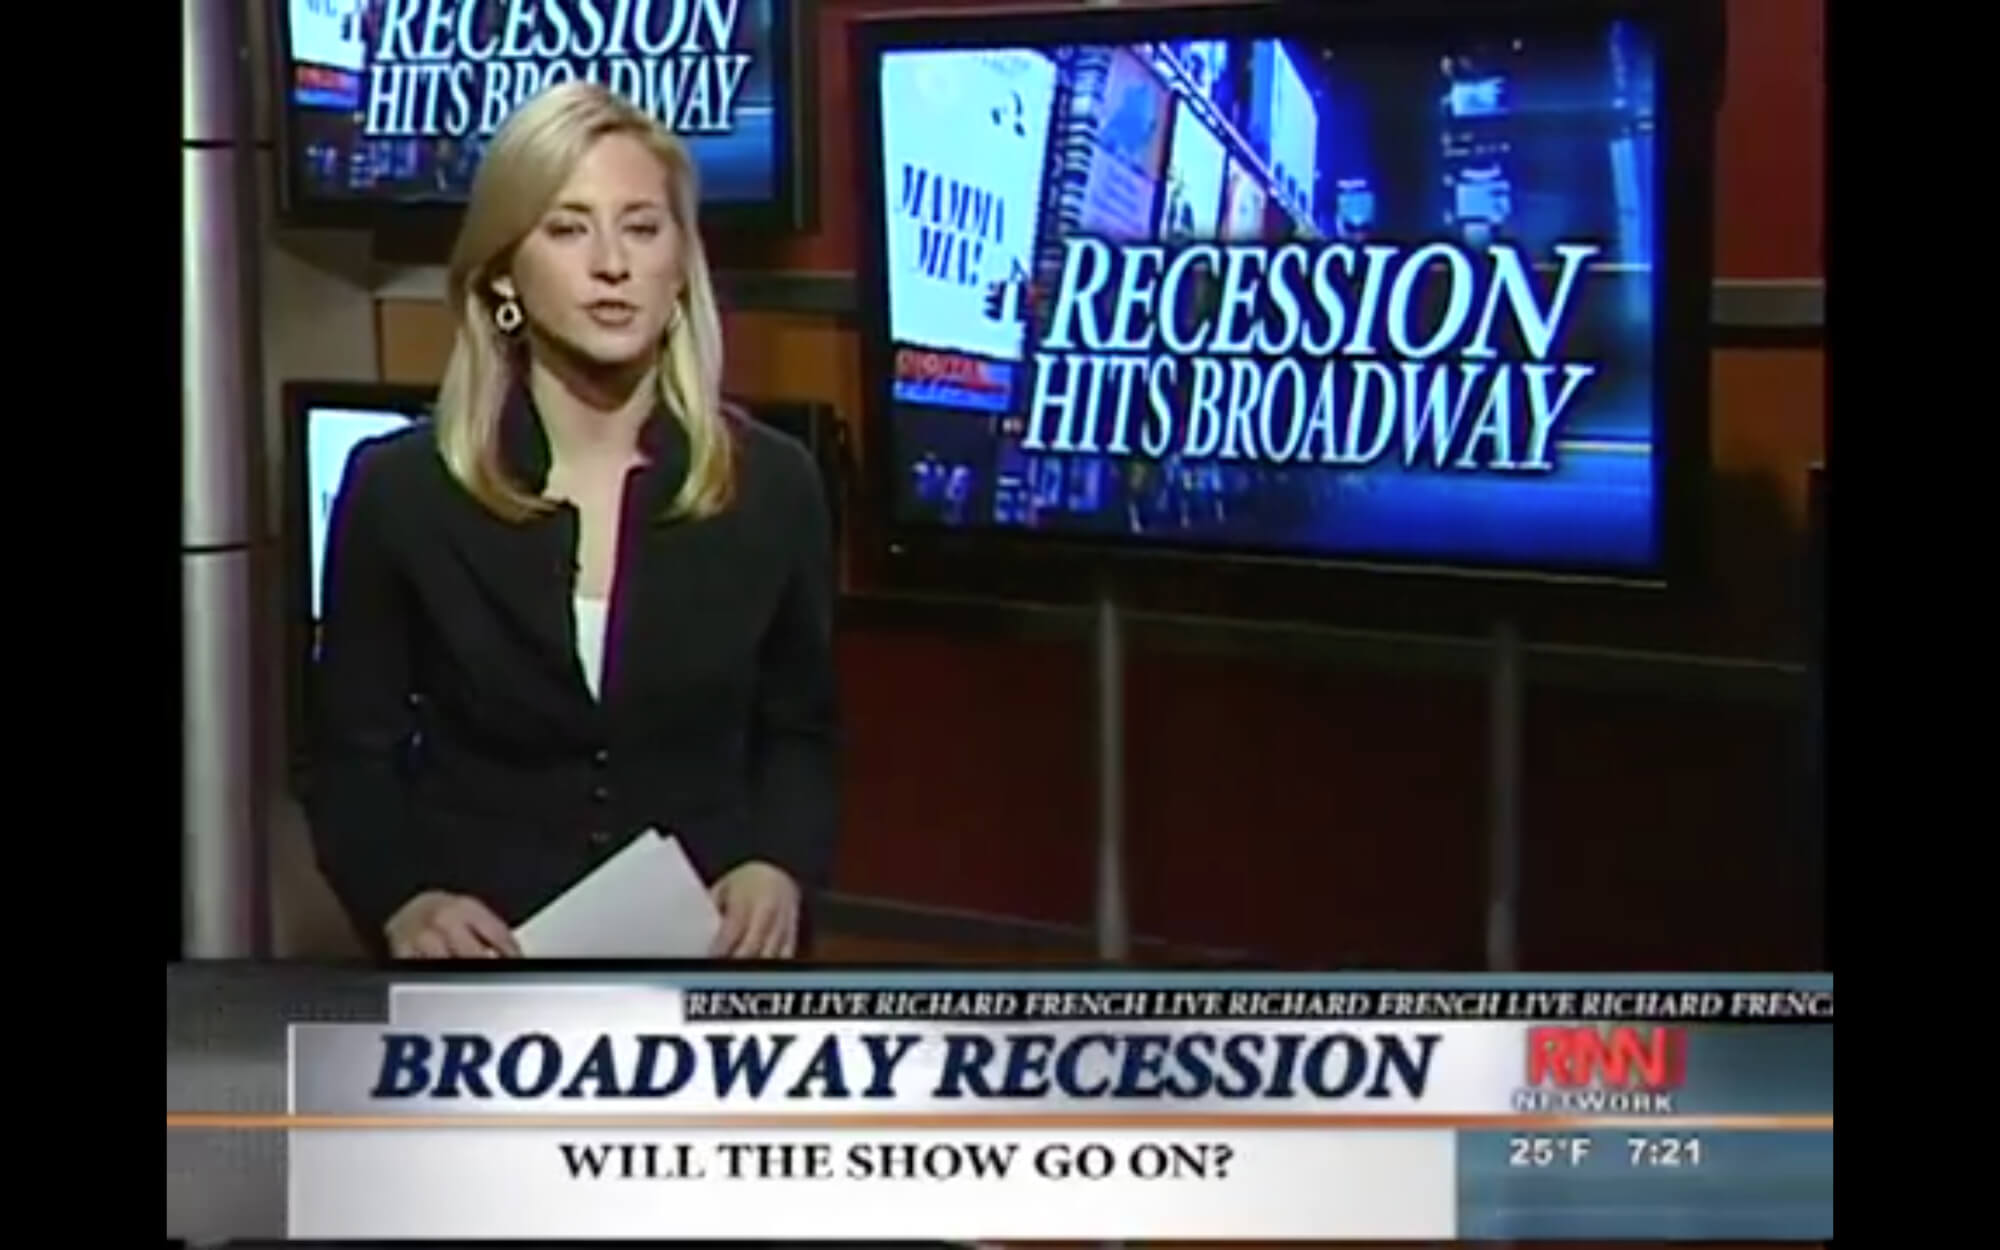 Recession Hits Broadway: Will the show go on?